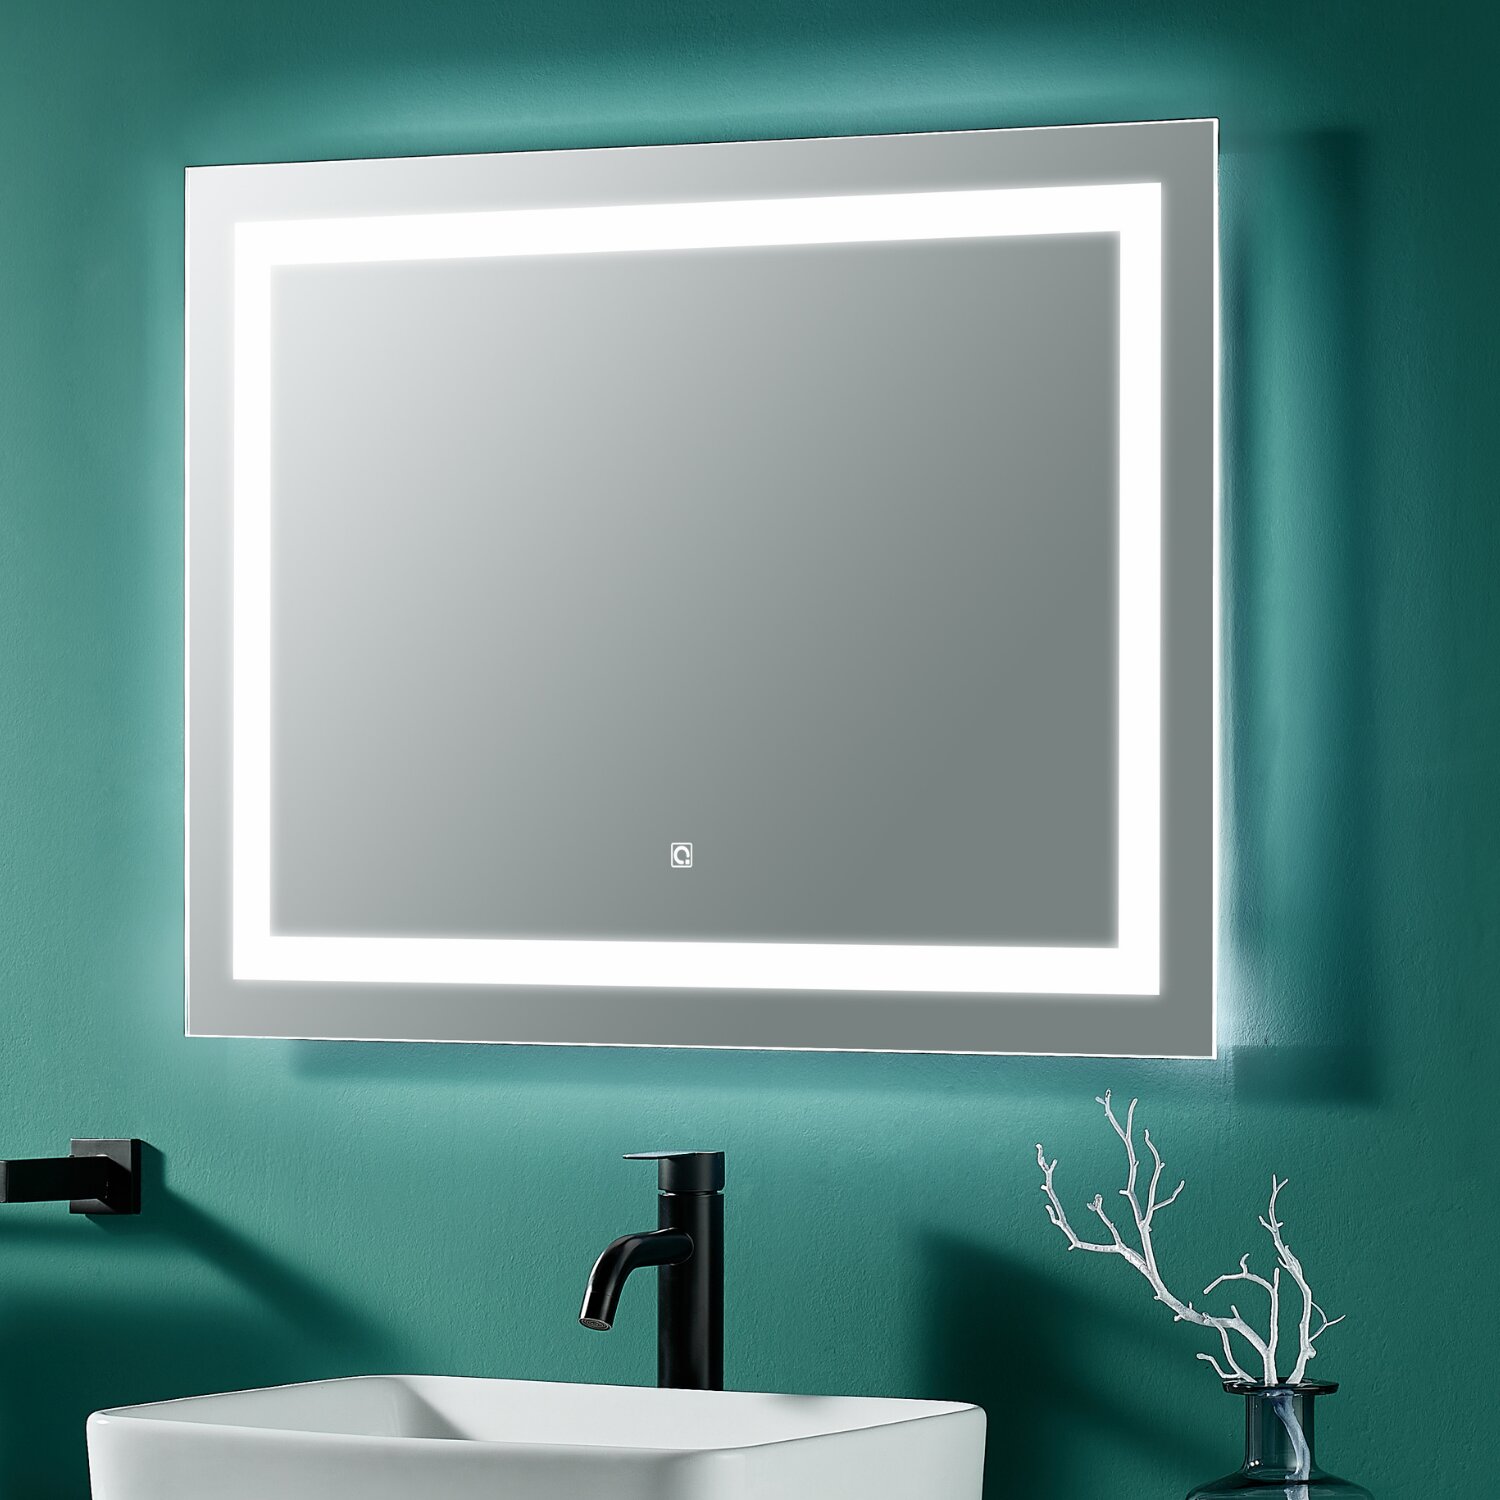 Details about   LED Bathroom Mirror Vertical/Horizontal modern style ECO lighting Malaga show original title 